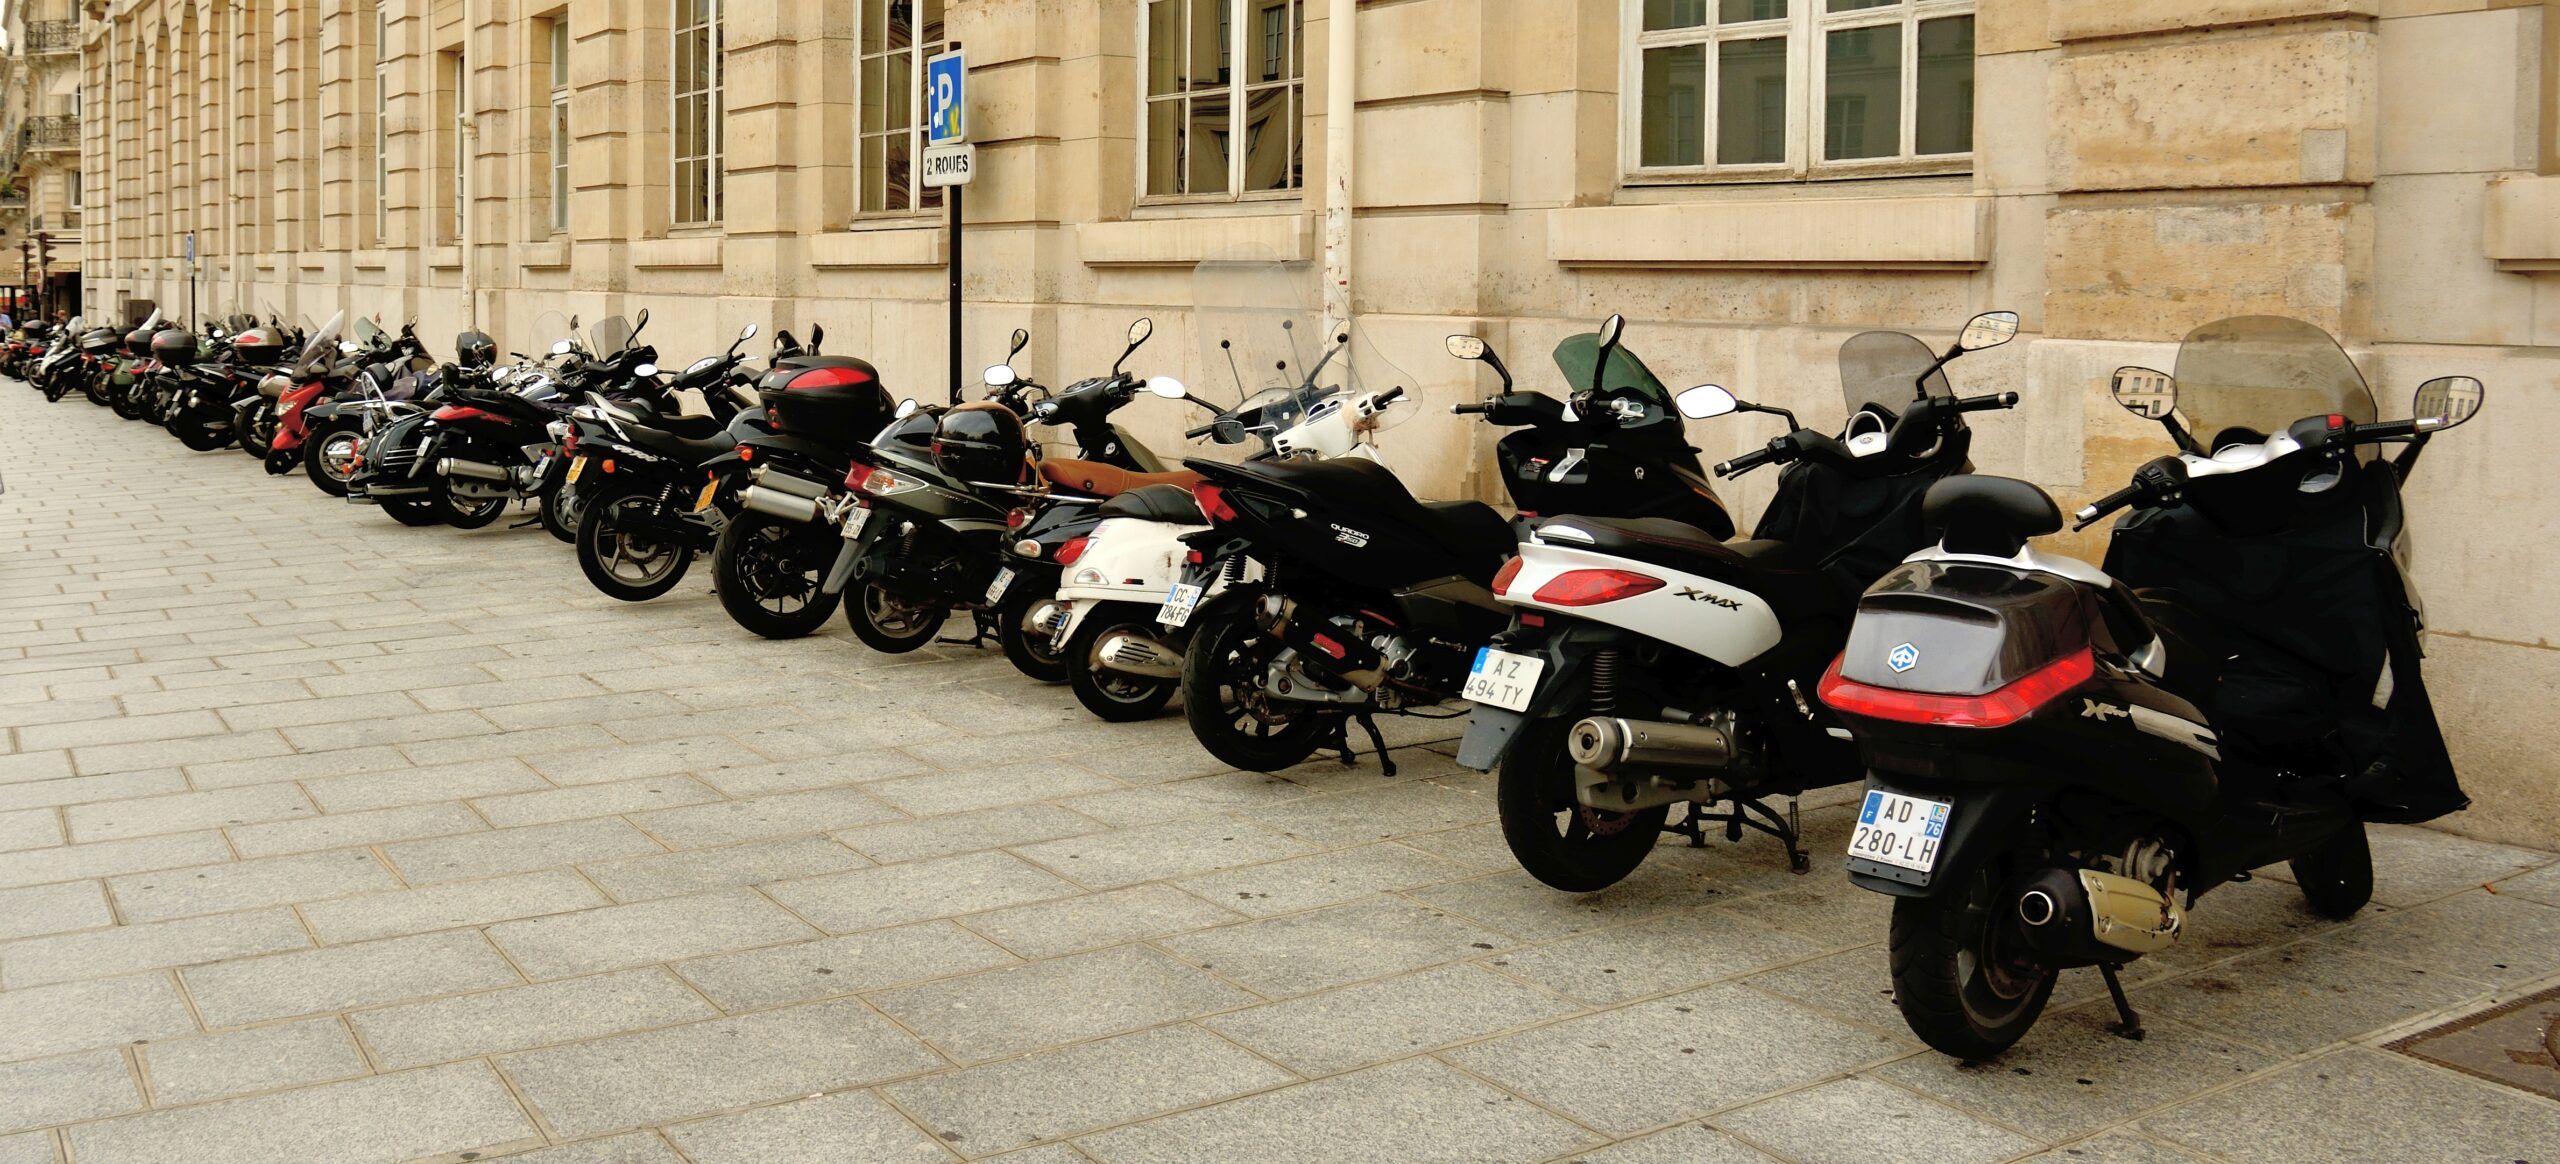 Parked Motorcycles